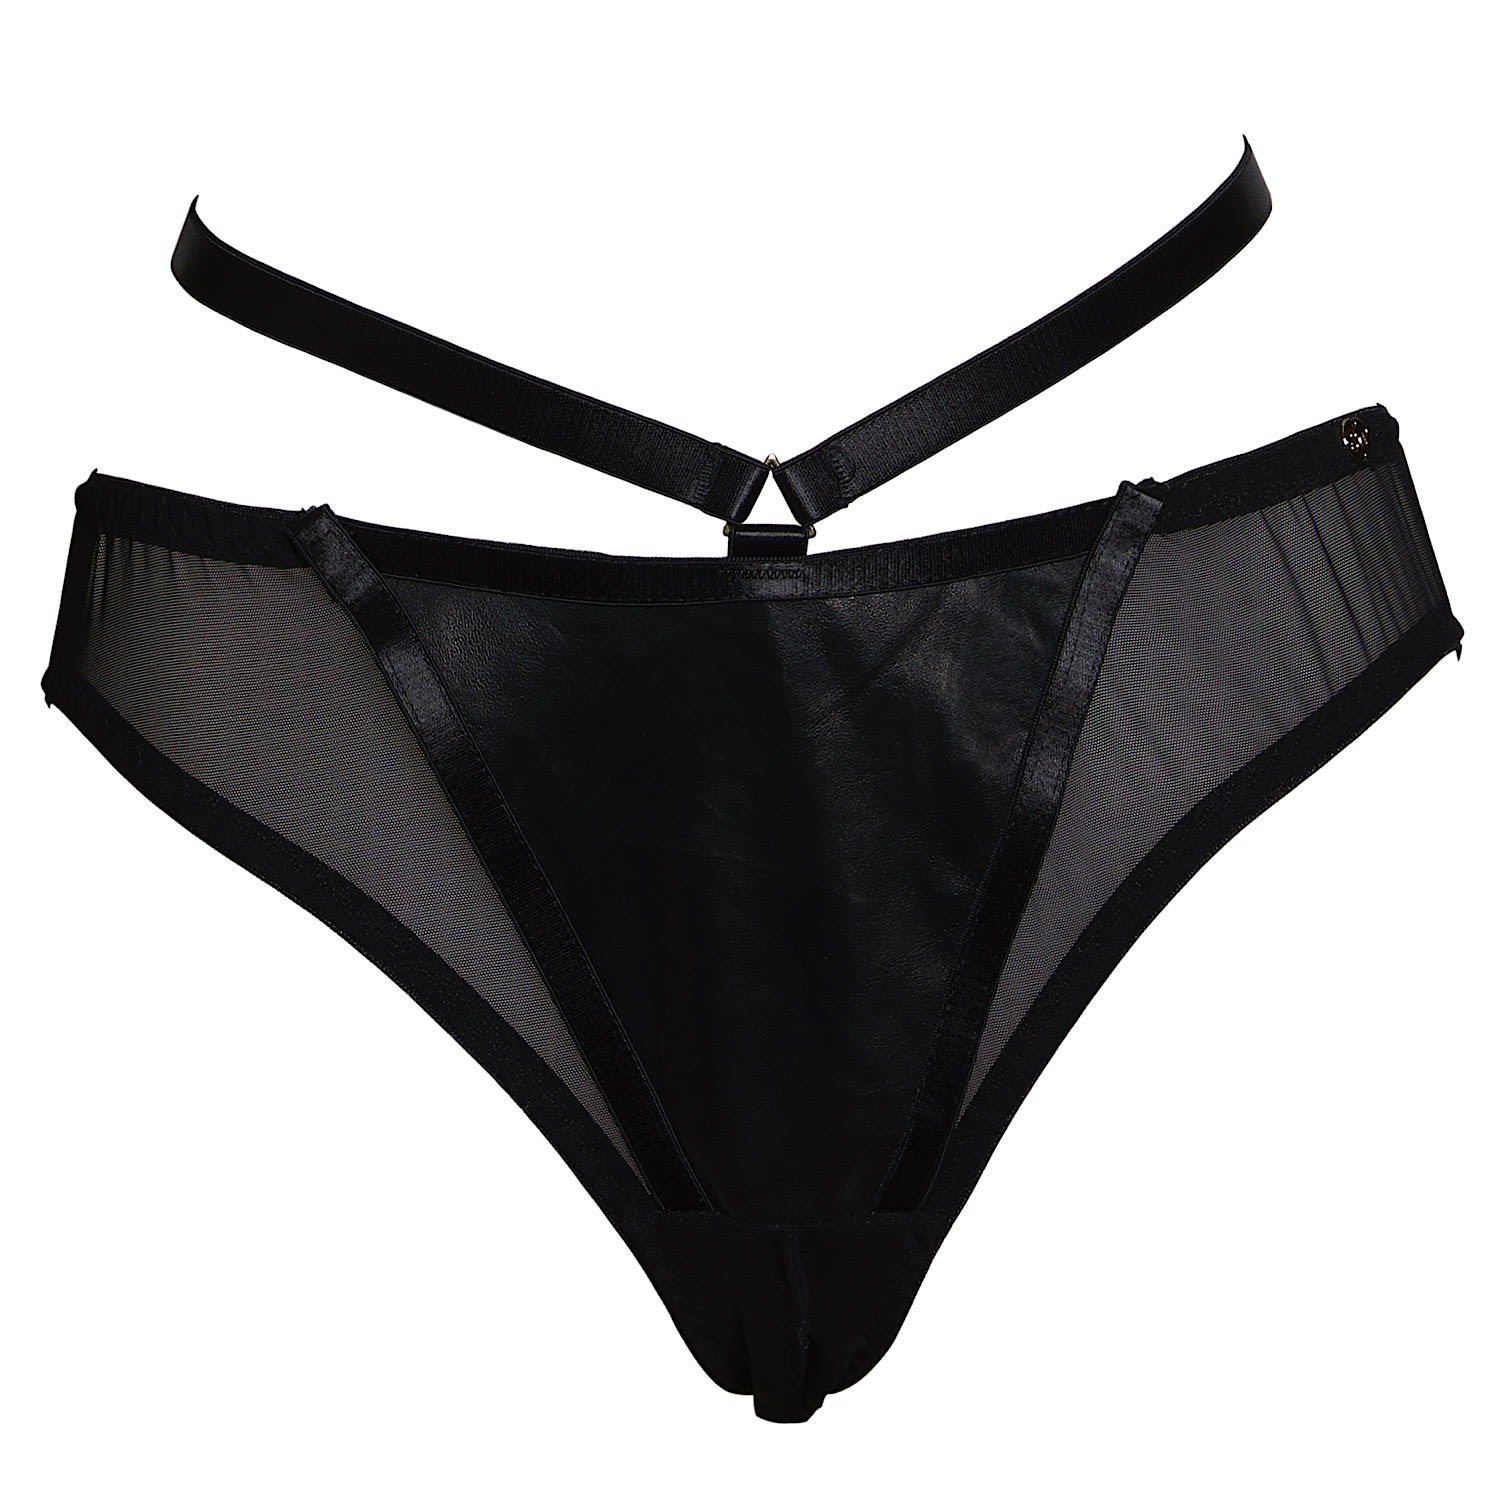 Something Wicked Women's Black Mia Open Back Leather Ouvert Brief